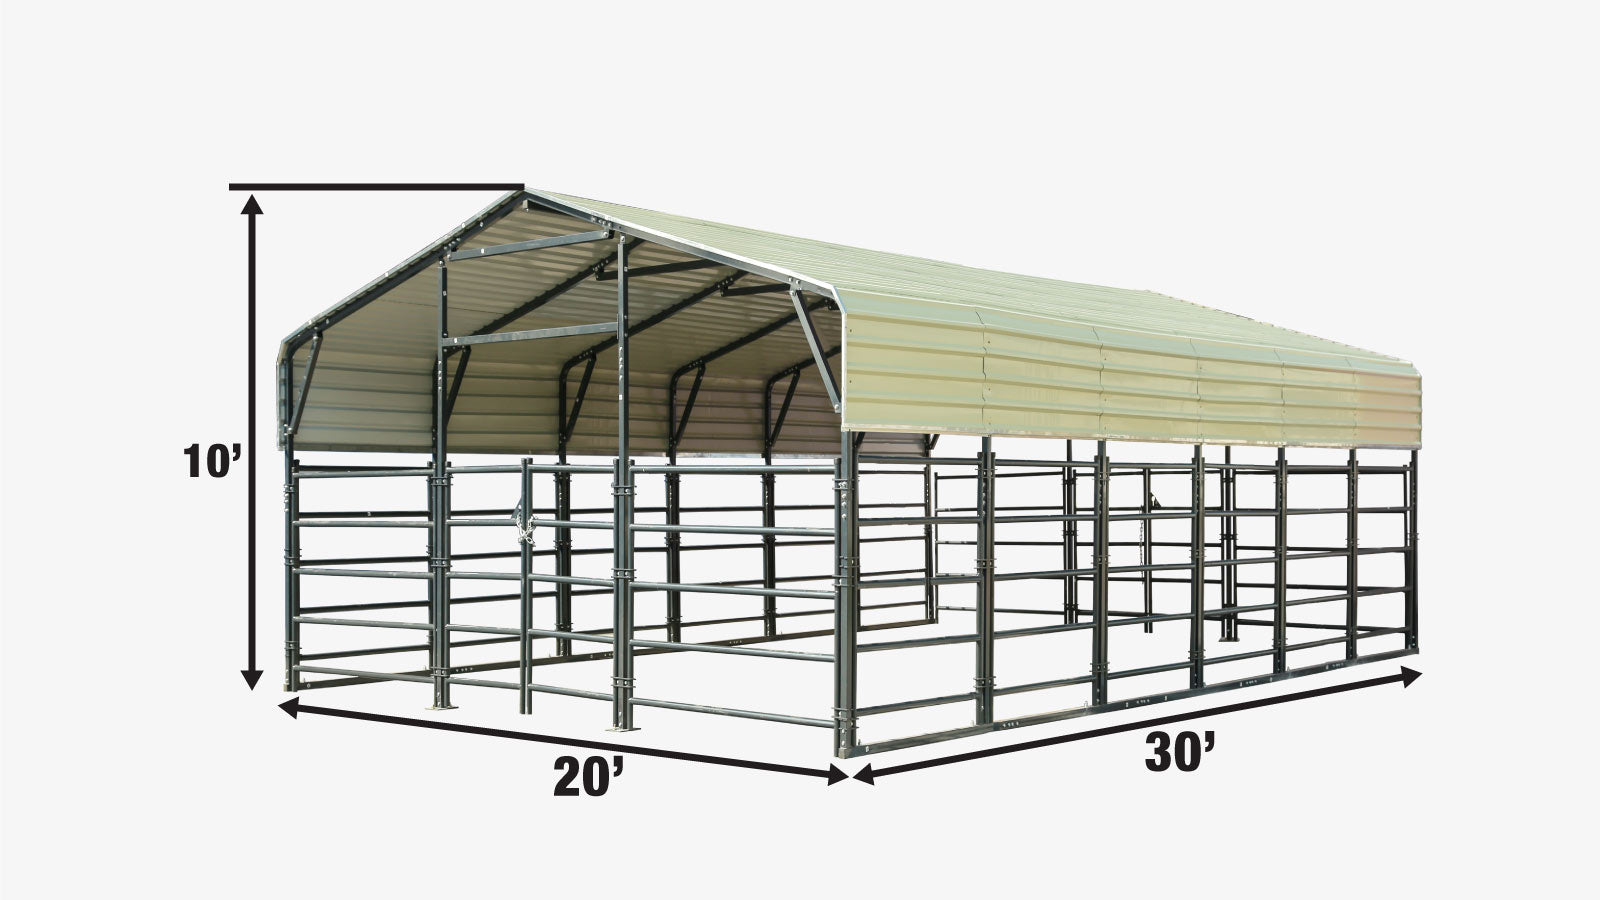 TMG Industrial 20’ x 30’ Livestock Corral Panel Metal Shed, 7’ Sidewall Height, 5’ Corral Panel Height, 600 Sq-Ft, 27 GA Corrugated Panels, TMG-MS2030LC-specifications-image